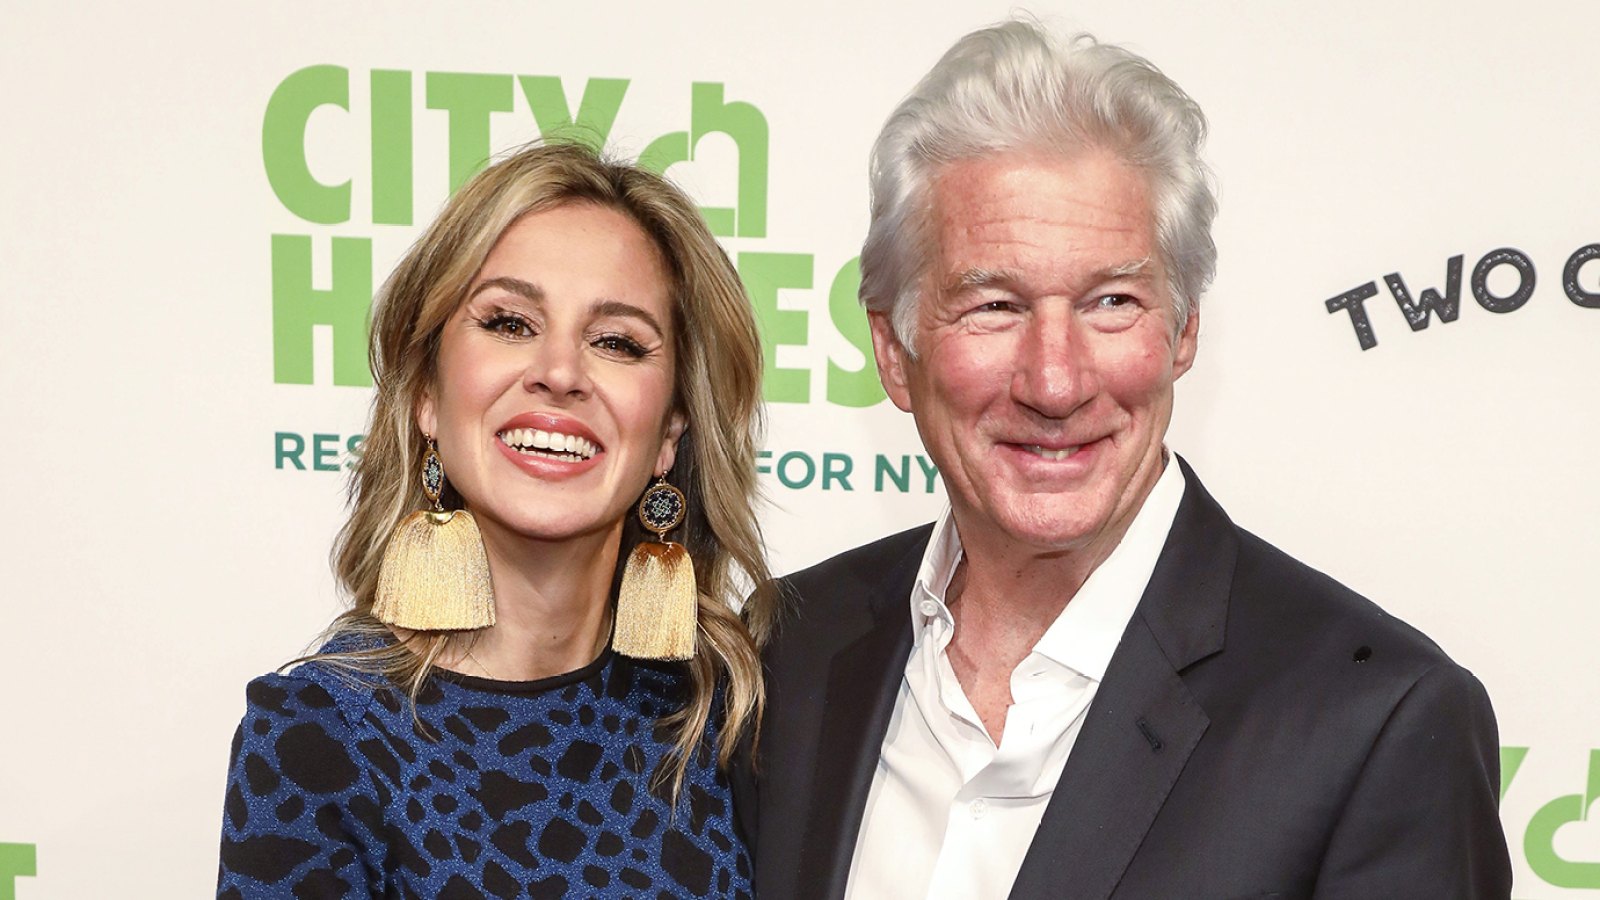 Richard Gere and Wife Alejandra Silva Share Rare Holiday Photo With Sons: 'Merry Christmas From Our Family'